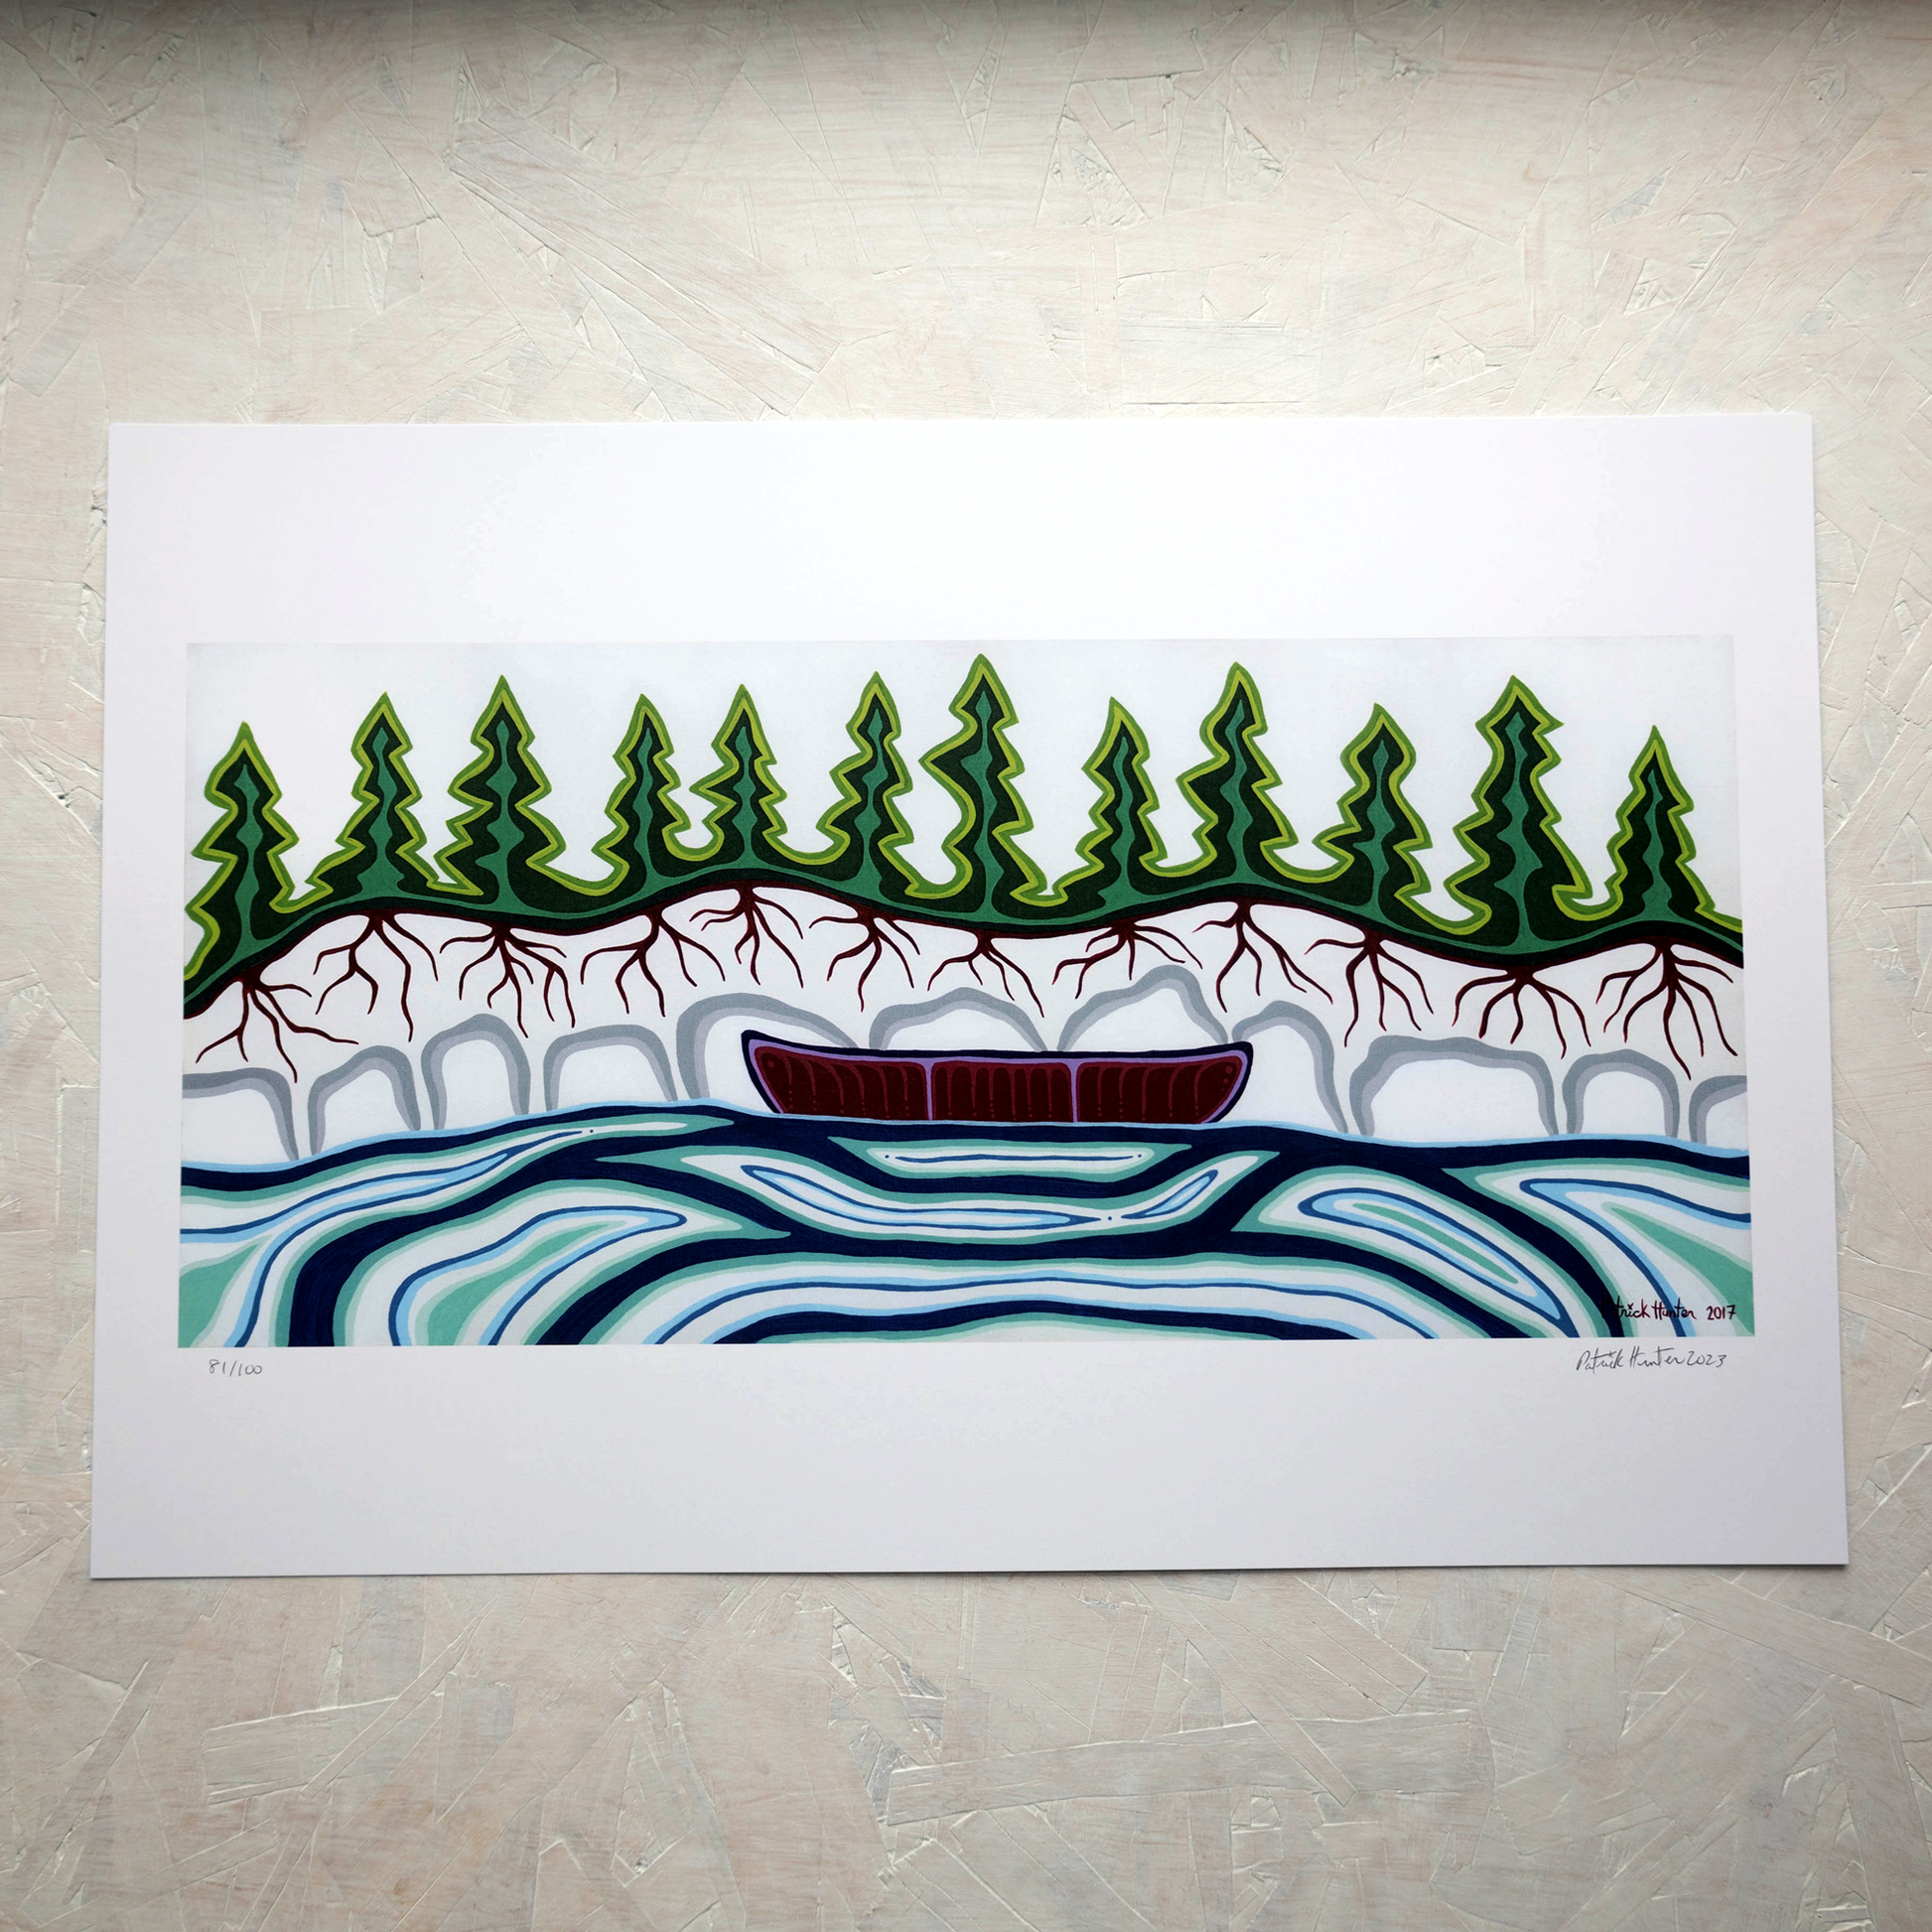 Print of Patrick Hunter's painting of a canoe on water, woodland art style.